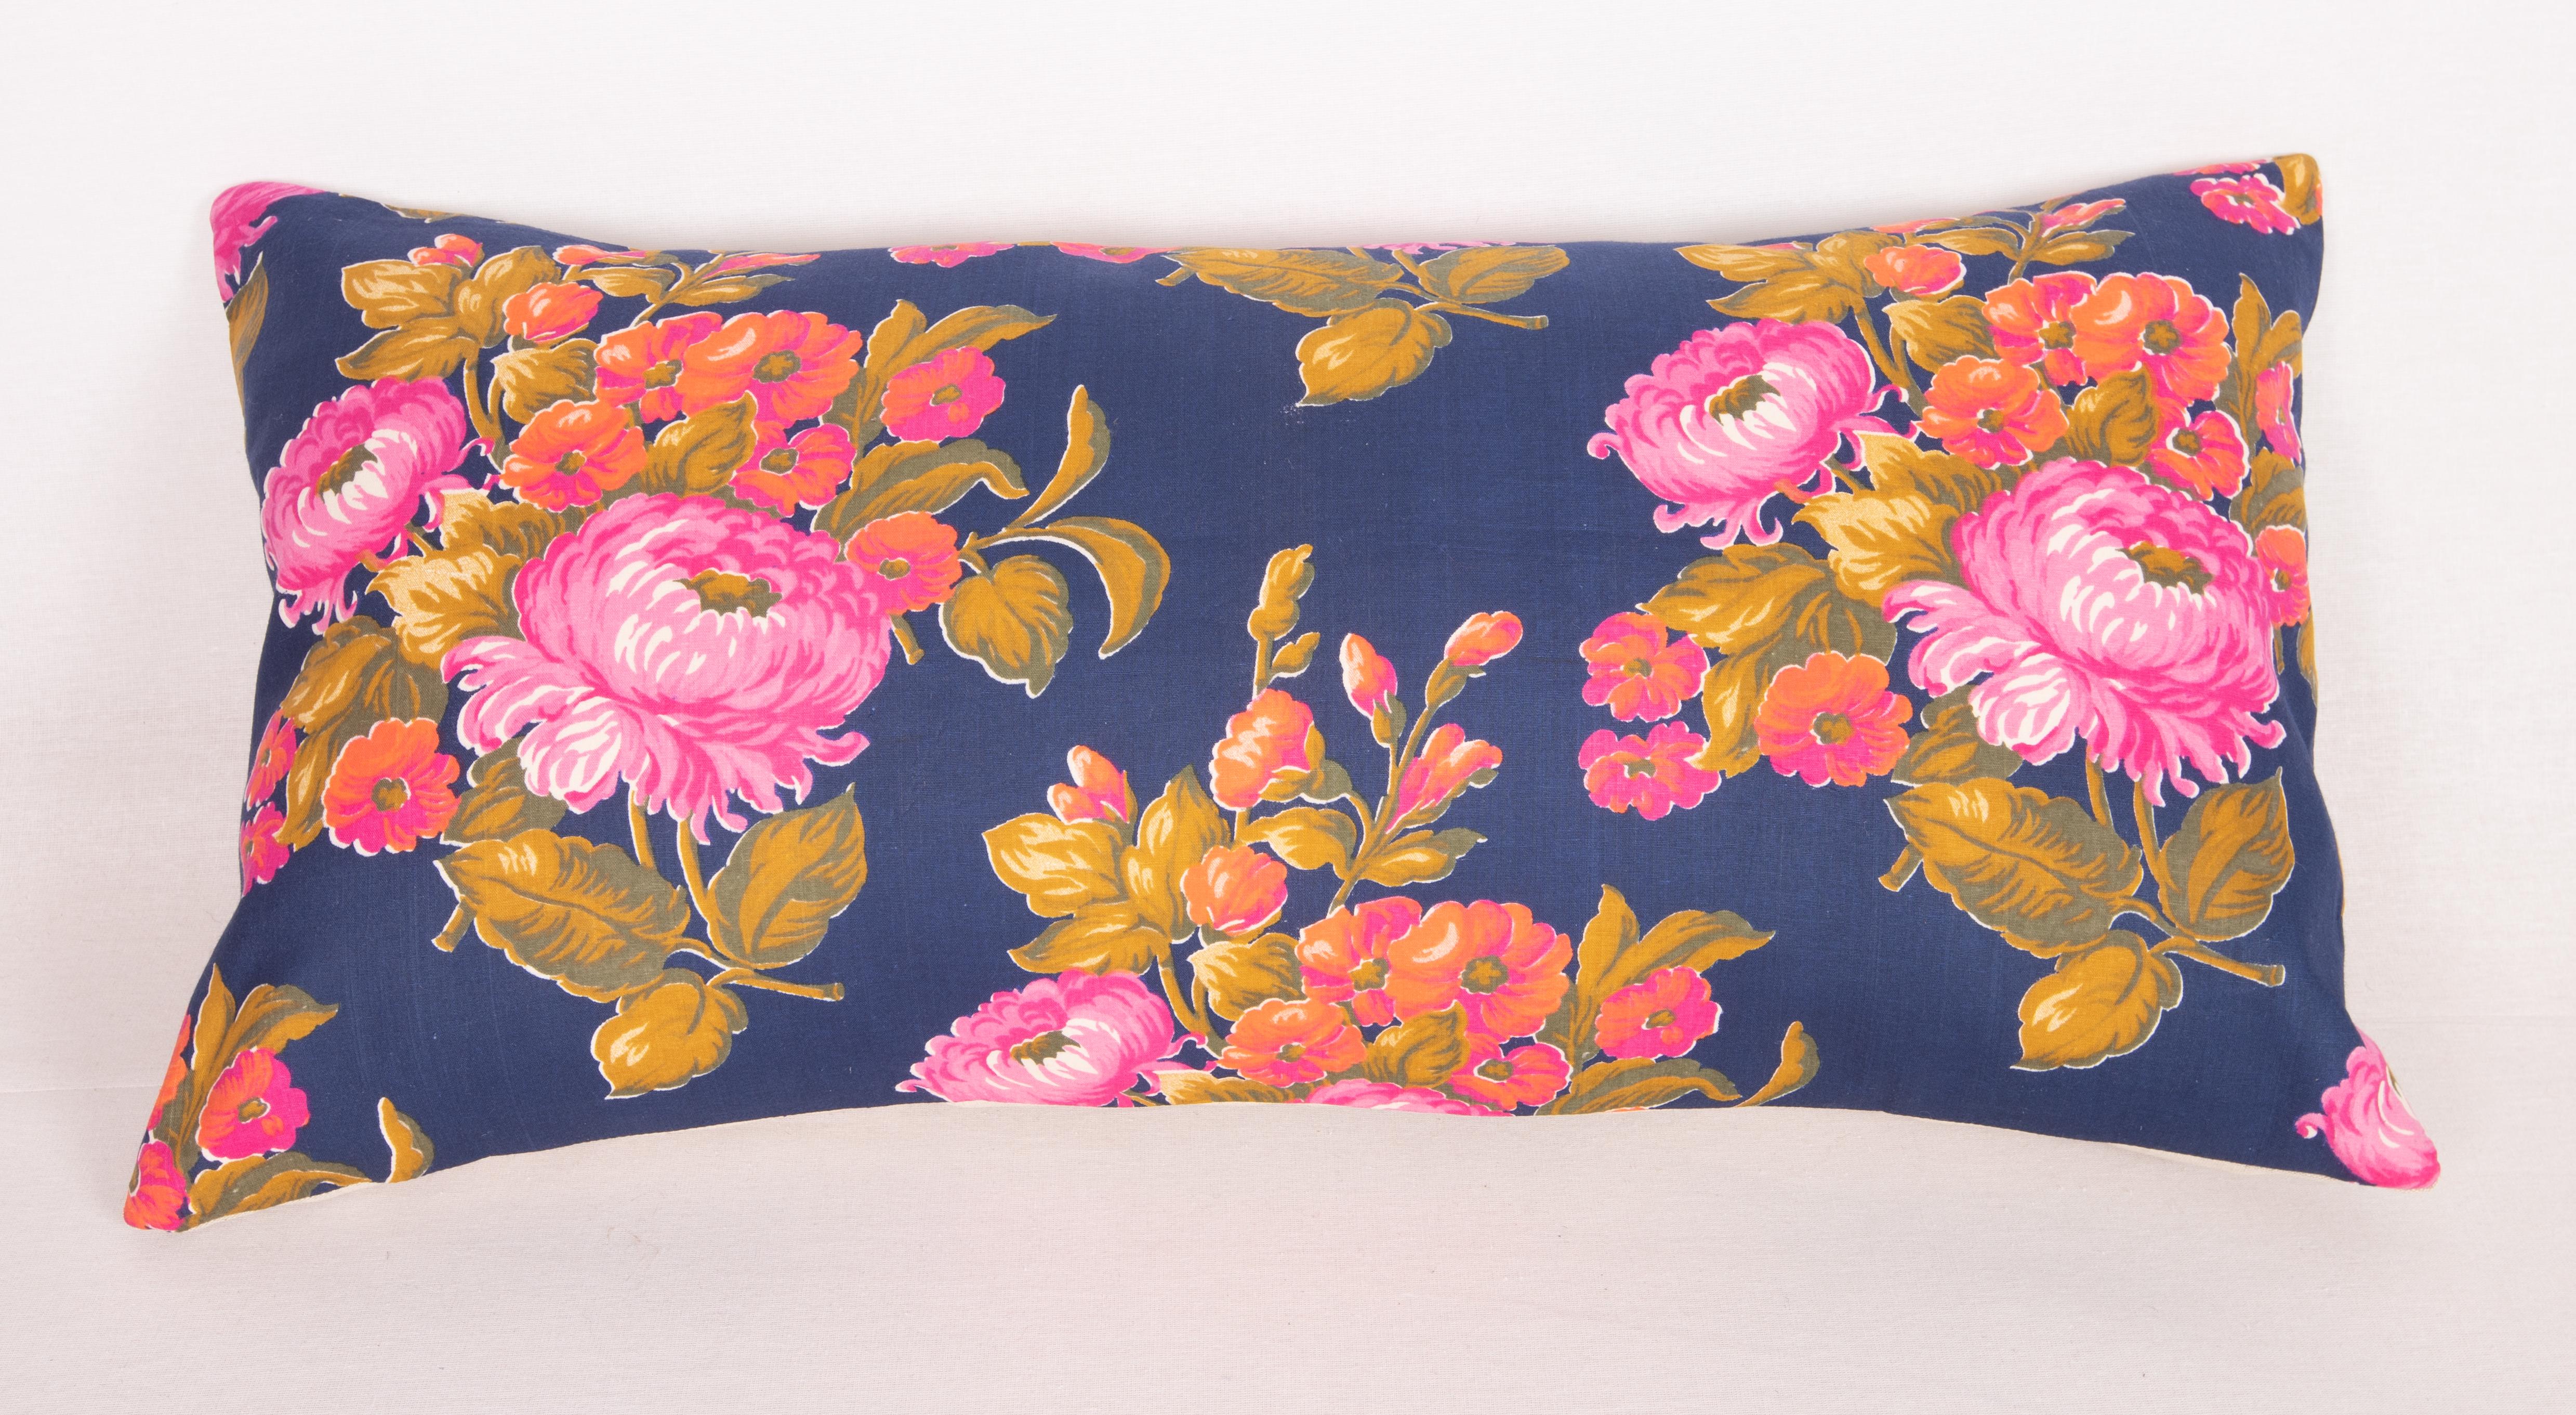 Cotton Russian Roller Printed Pillow Covers, Mid 20th C. For Sale